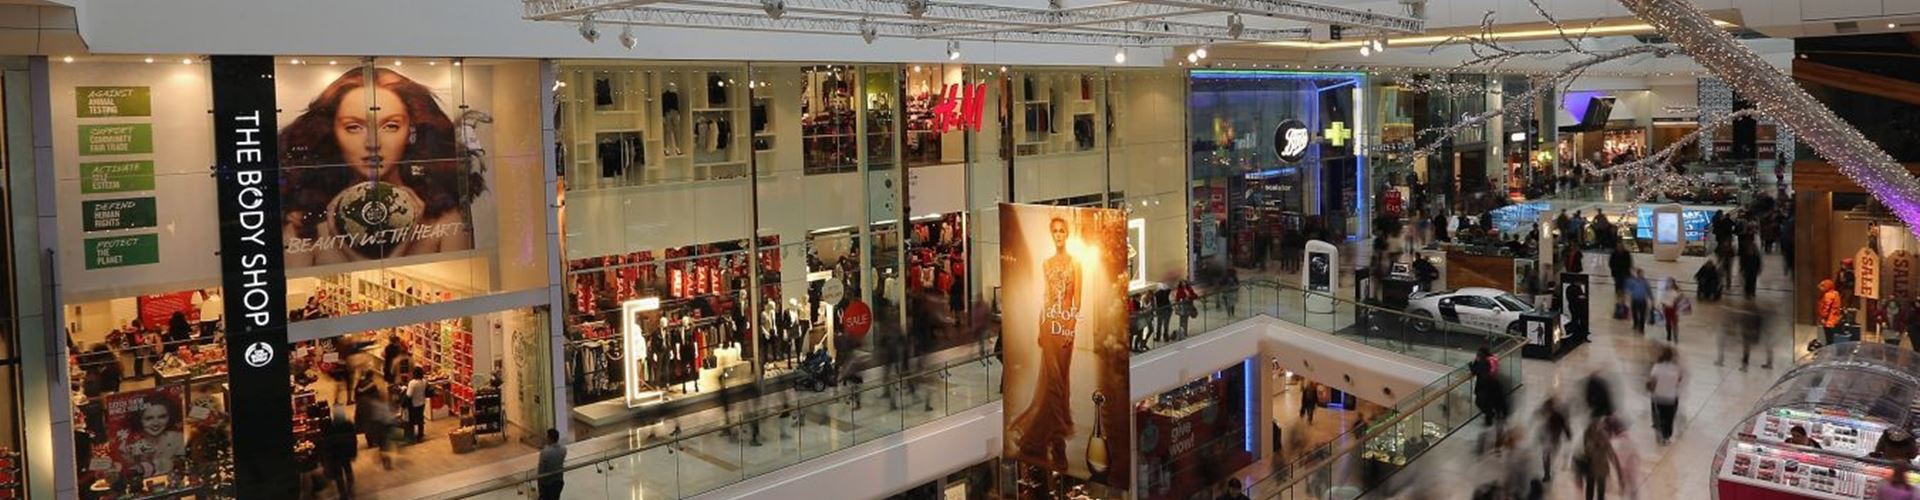 UK retailers call for business rate reform to boost sector